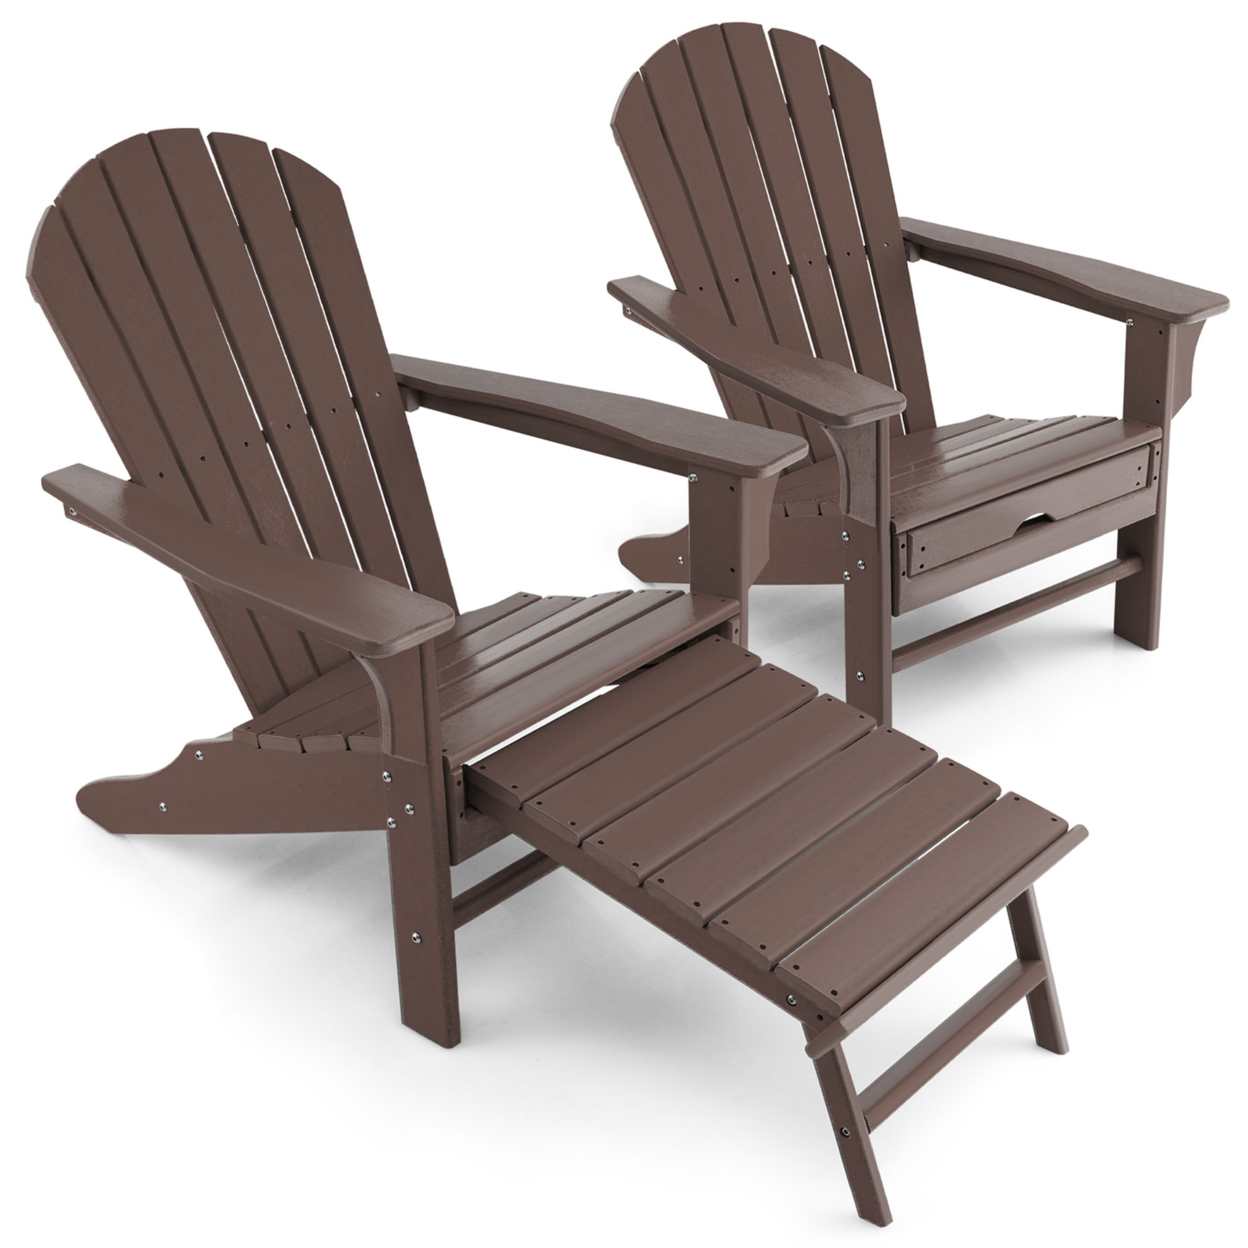 Set Of 2 Patio Adirondack Chair HDPE Outdoor Lounge Chair W/ Retractable Ottoman - Coffee